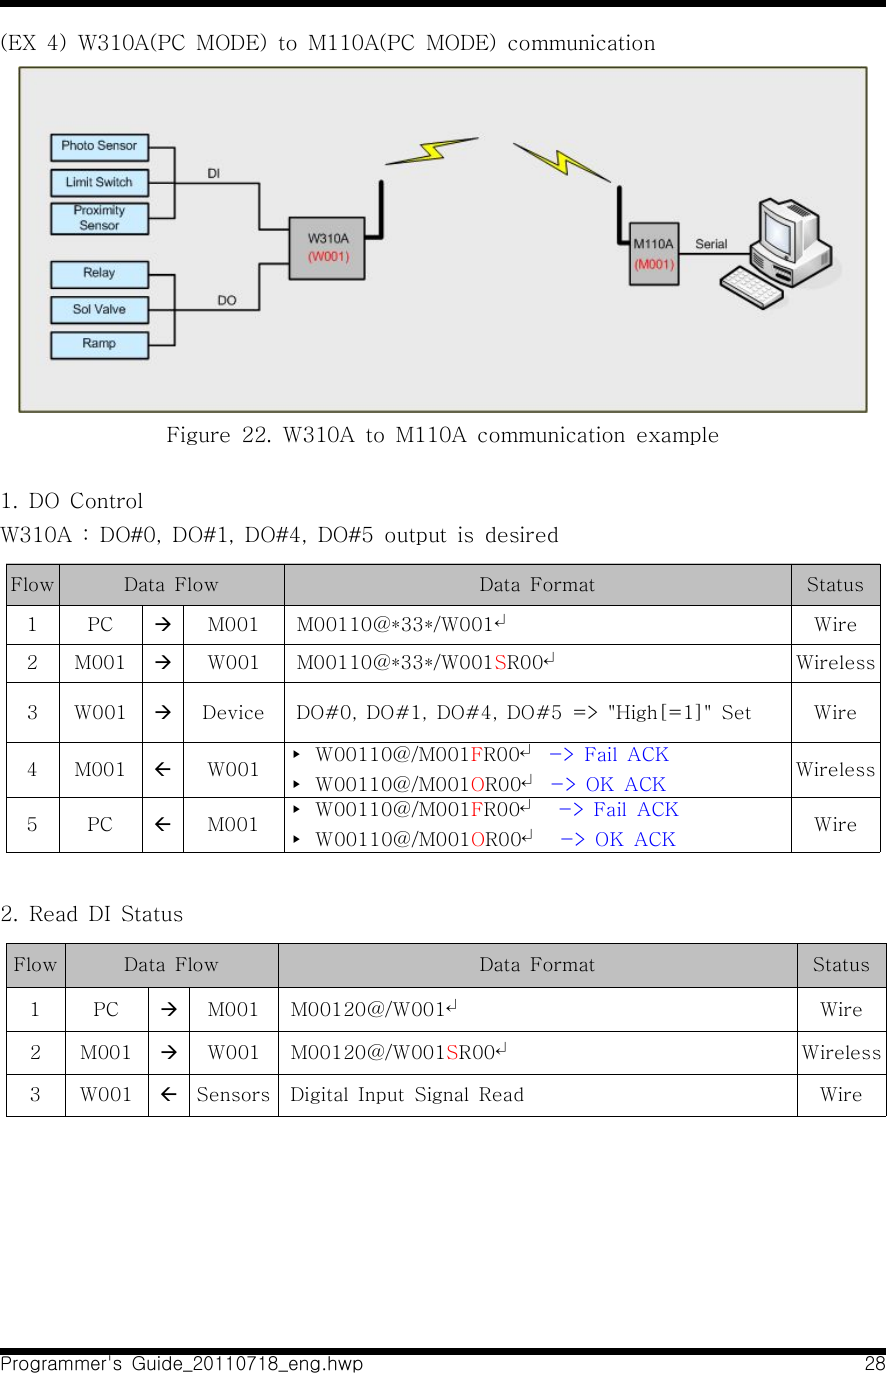 Programmer&apos;s  Guide_20110718_eng.hwp 28(EX  4)  W310A(PC  MODE)  to  M110A(PC  MODE)  communication Figure  22.  W310A  to  M110A  communication  example1.  DO  ControlW310A  :  DO#0,  DO#1,  DO#4,  DO#5  output  is  desiredFlow Data  Flow Data  Format Status1 PC àM001   M00110@*33*/W001↵Wire2 M001 àW001   M00110@*33*/W001SR00↵Wireless3 W001 àDevice   DO#0,  DO#1,  DO#4,  DO#5  =&gt;  &quot;High[=1]&quot;  Set Wire4 M001 ßW001 ▸  W00110@/M001FR00↵  -&gt;  Fail  ACK▸  W00110@/M001OR00↵  -&gt;  OK  ACK Wireless5 PC ßM001 ▸  W00110@/M001FR00↵    -&gt;  Fail  ACK ▸  W00110@/M001OR00↵    -&gt;  OK  ACK Wire2.  Read  DI  StatusFlow Data  Flow Data  Format Status1 PC àM001   M00120@/W001↵Wire2 M001 àW001   M00120@/W001SR00↵Wireless3 W001 ßSensors   Digital  Input  Signal  Read Wire